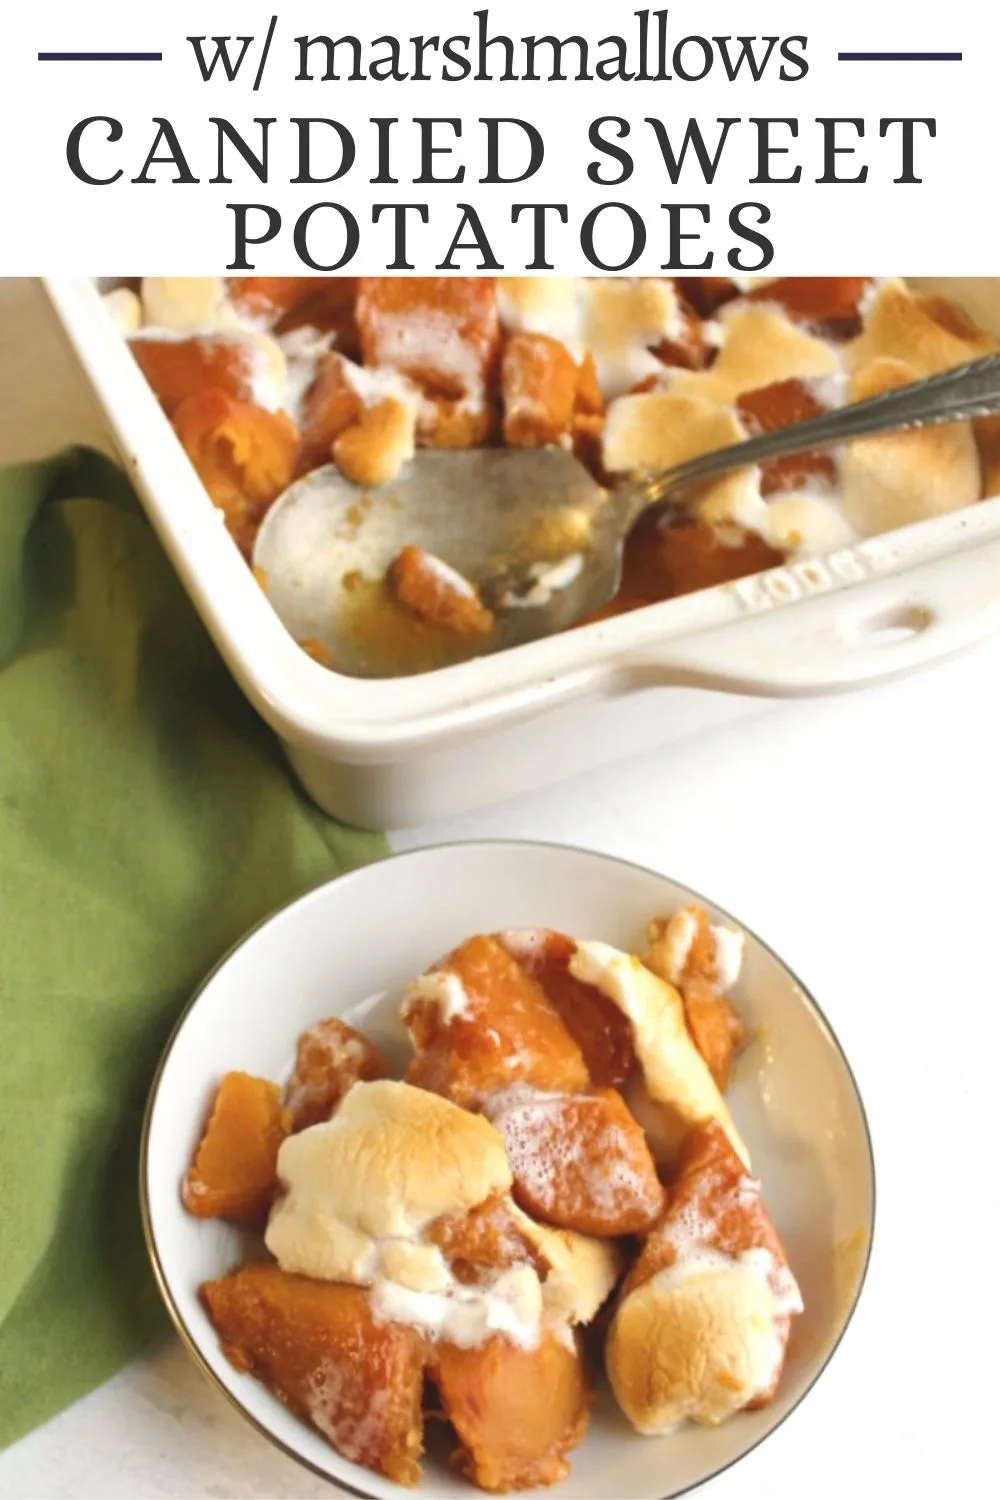 Candied sweet potatoes topped with marshmallows are a Thanksgiving staple at our house. Really they would be a great addition to a roast chicken or pork dinner as well!